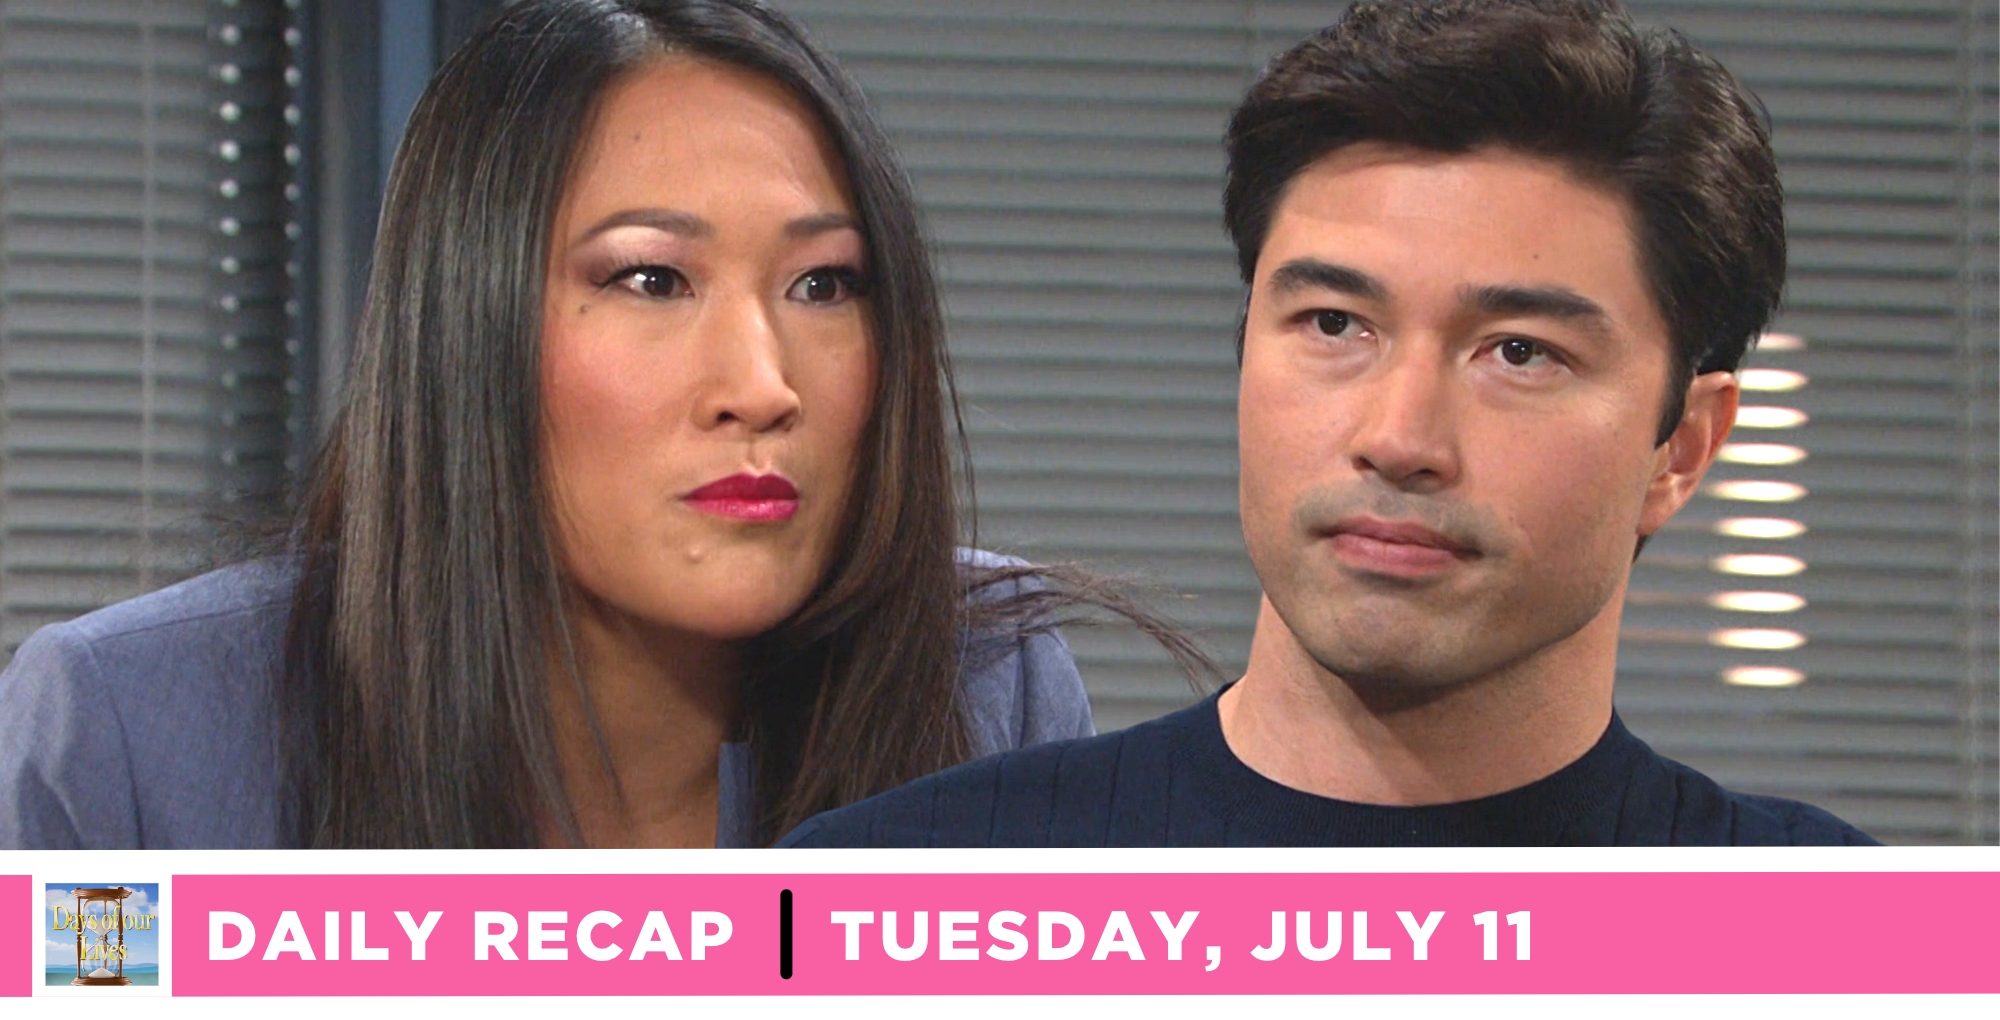 li shin mocked melinda trask on the days of our lives recap for tuesday, july 11, 2023.